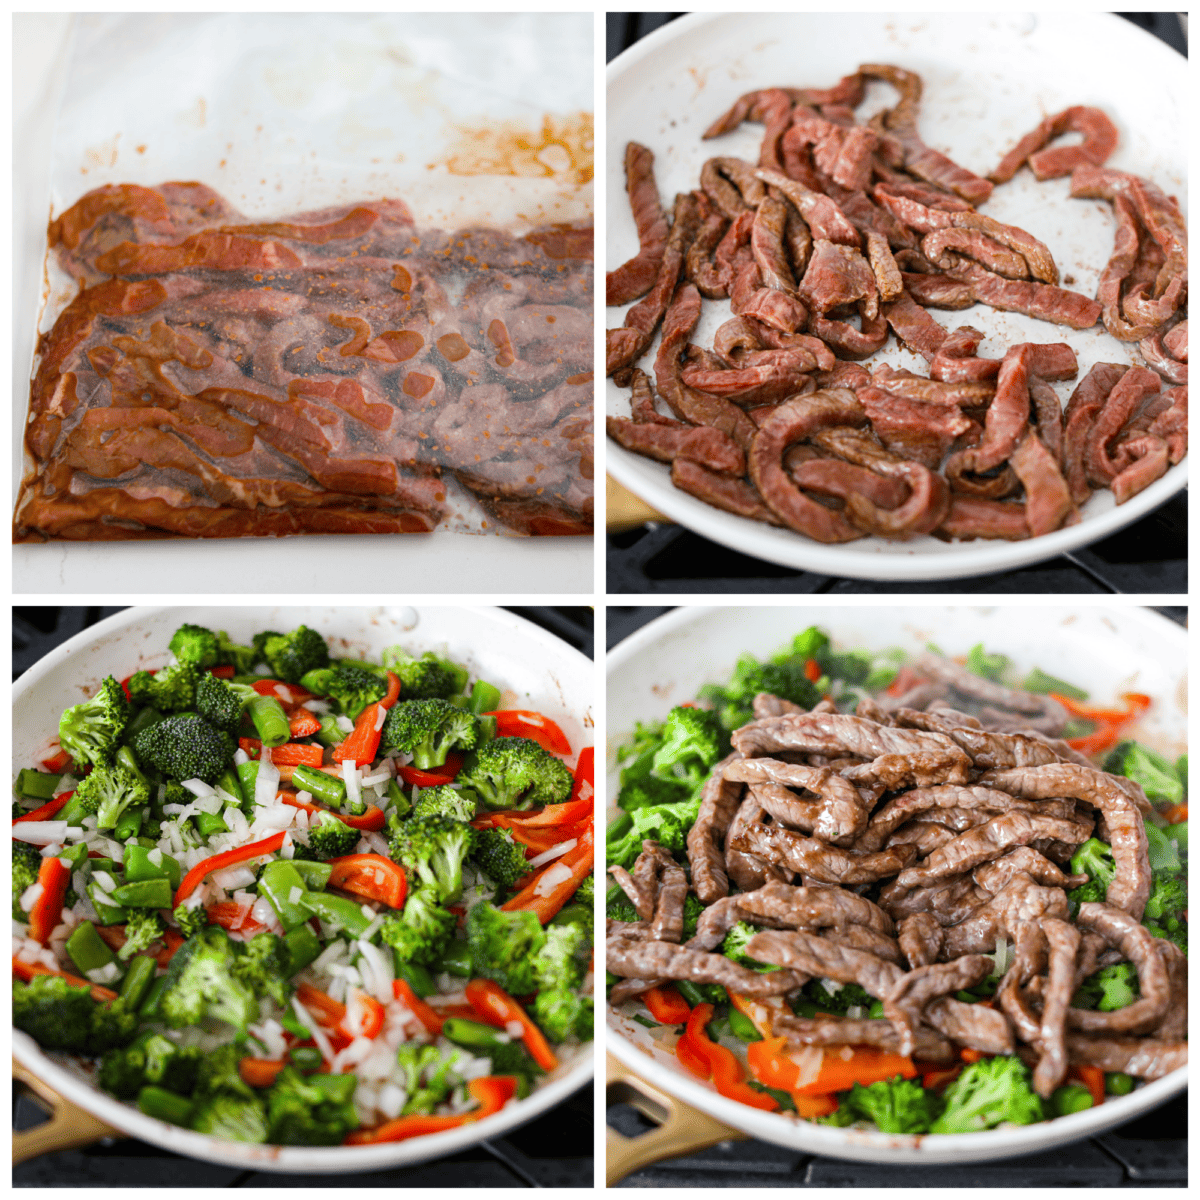 4-photo collage of the steak strips and vegetables being cooked in a skillet.